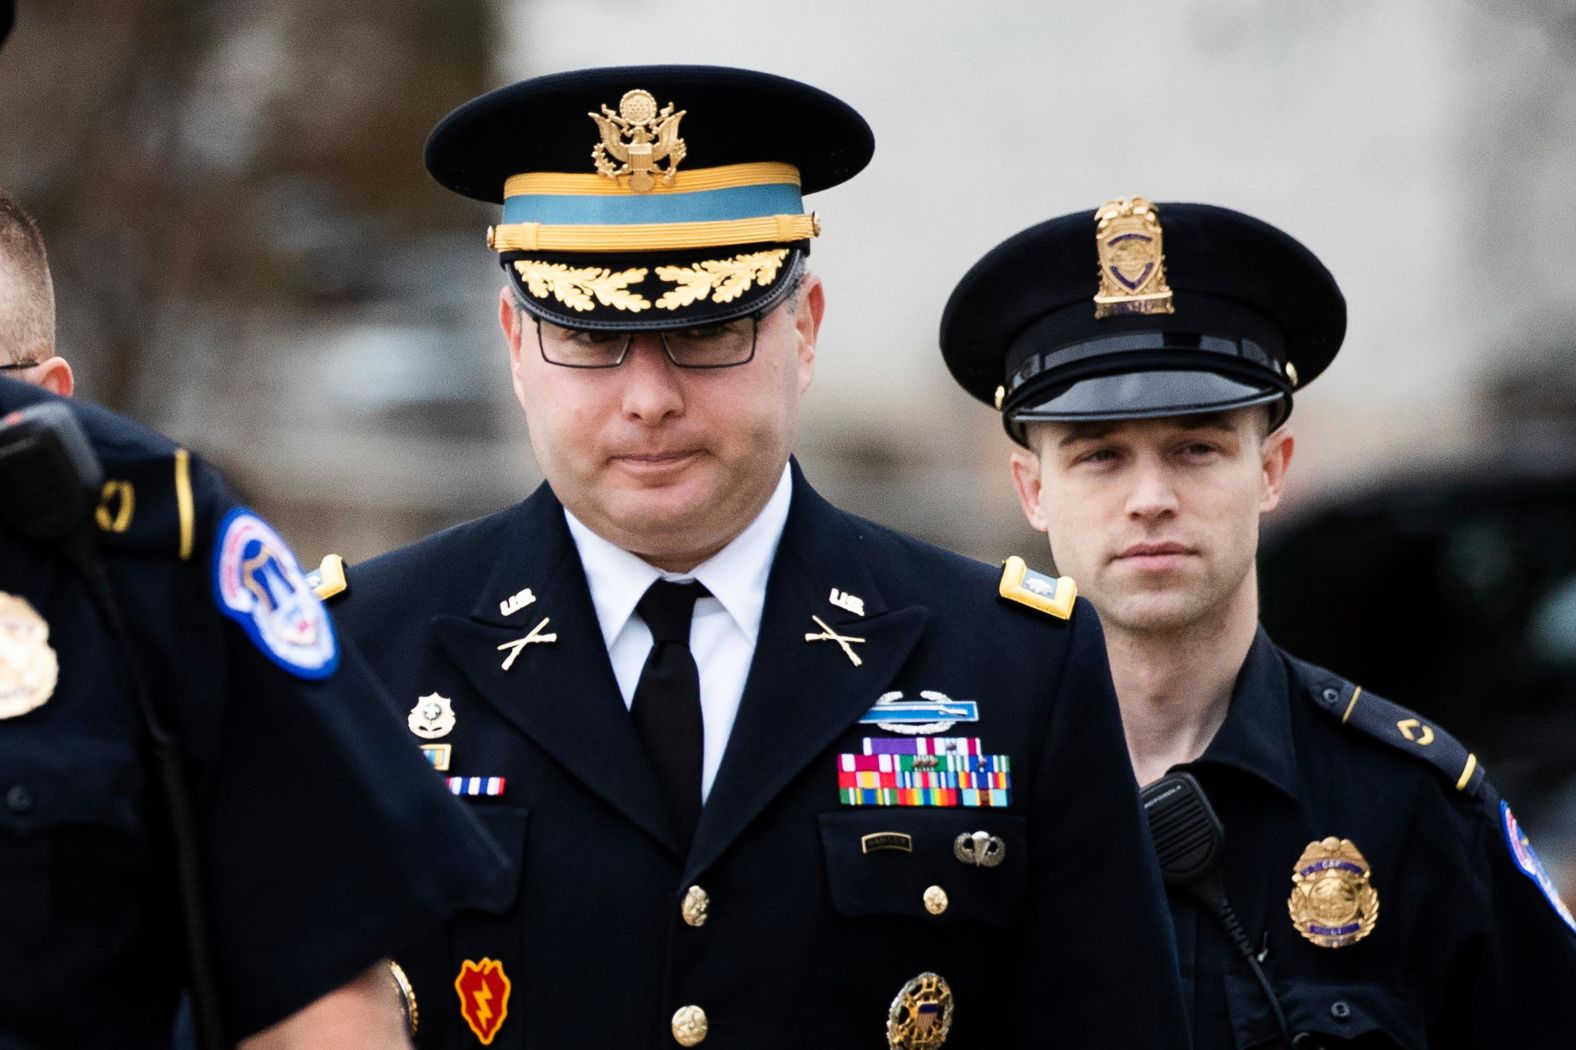 Army Lt. Col. Alexander Vindman, the top White House Ukraine expert, arrives on Capitol Hill on October 29. According to two sources present at <a href="index.php?page=&url=https%3A%2F%2Fwww.cnn.com%2F2019%2F10%2F30%2Fpolitics%2Fvindman-ukraine-aid-trump-investigations%2Findex.html" target="_blank">his deposition,</a> Vindman told congressional investigators that he was convinced that a quid pro quo existed by July 10, which was before the Trump-Zelensky phone call that is now at the heart of the impeachment inquiry. 